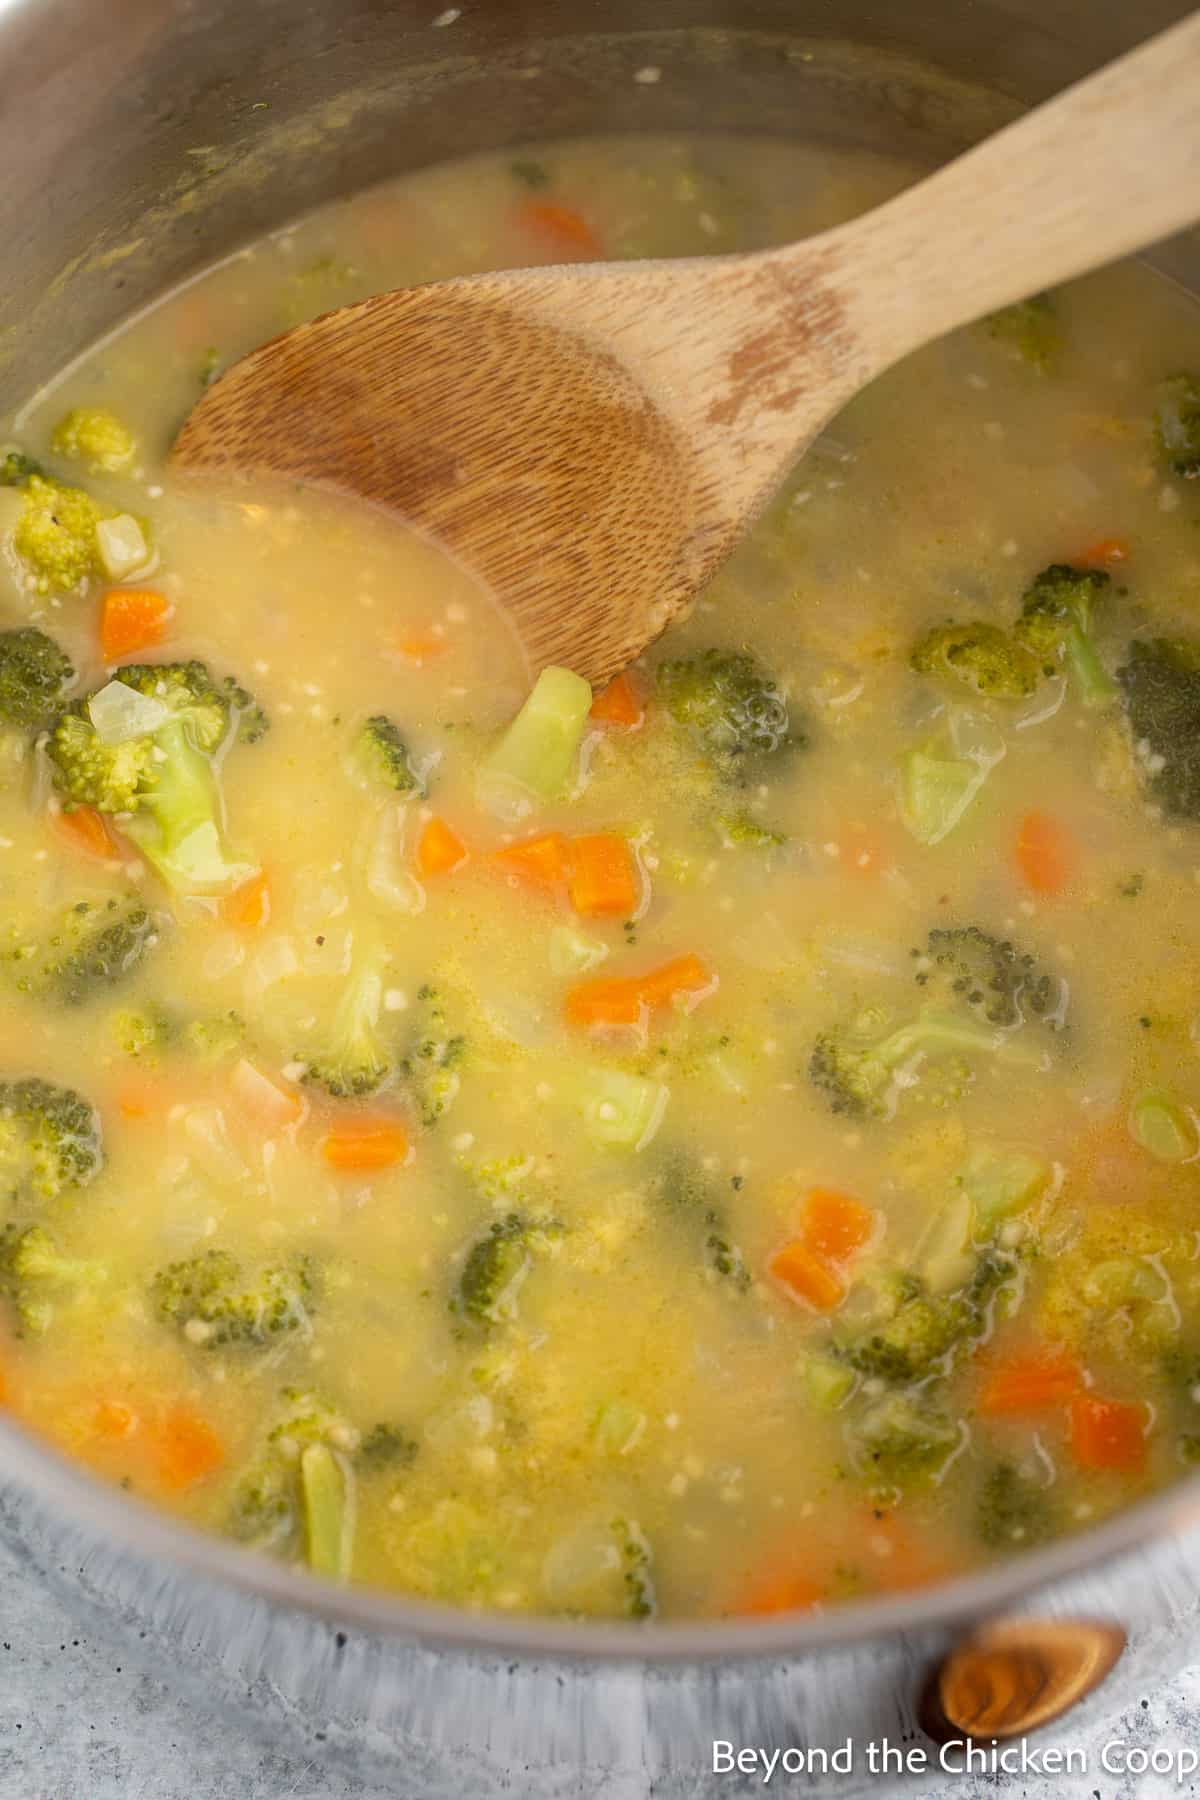 Cooked broccoli and chunks of carrots in a soup. 